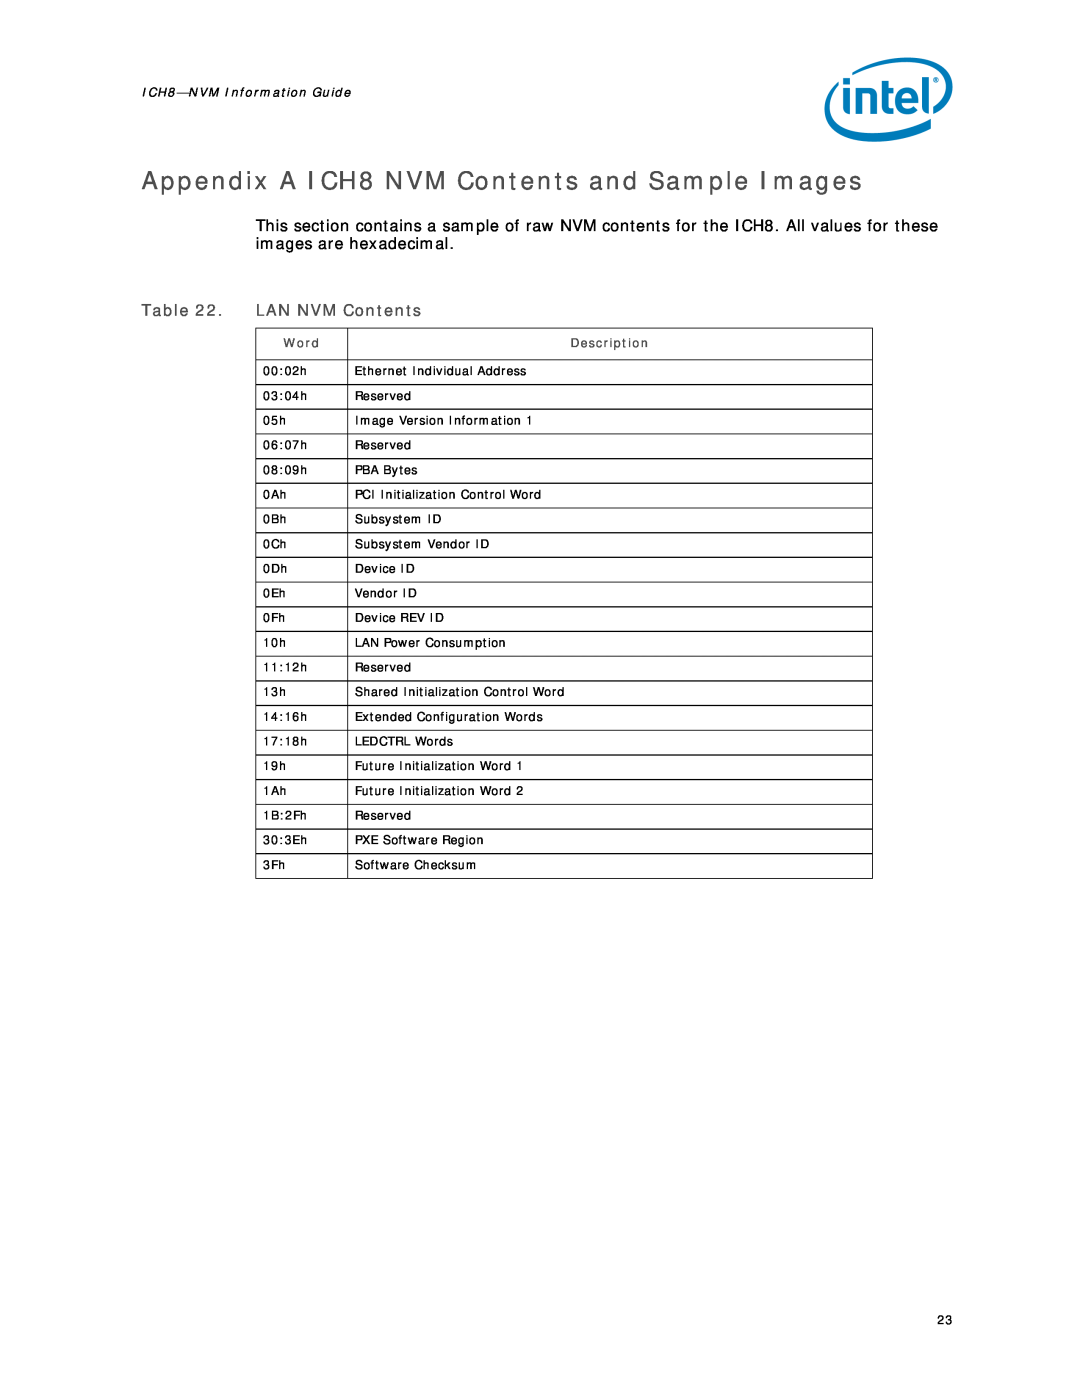 Intel 8 LAN manual Appendix A ICH8 NVM Contents and Sample Images, LAN NVM Contents, ICH8-NVMInformation Guide 